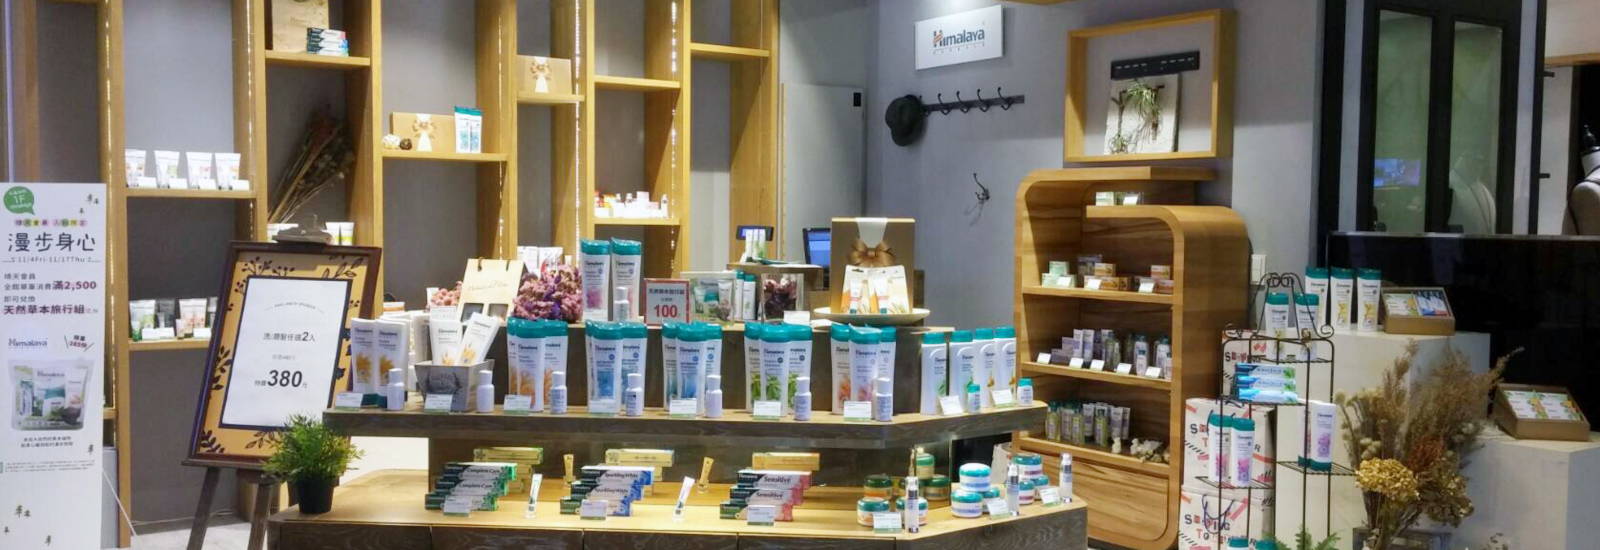 Himalaya products in store – Sustainability packaging - The Himalaya Drug Company